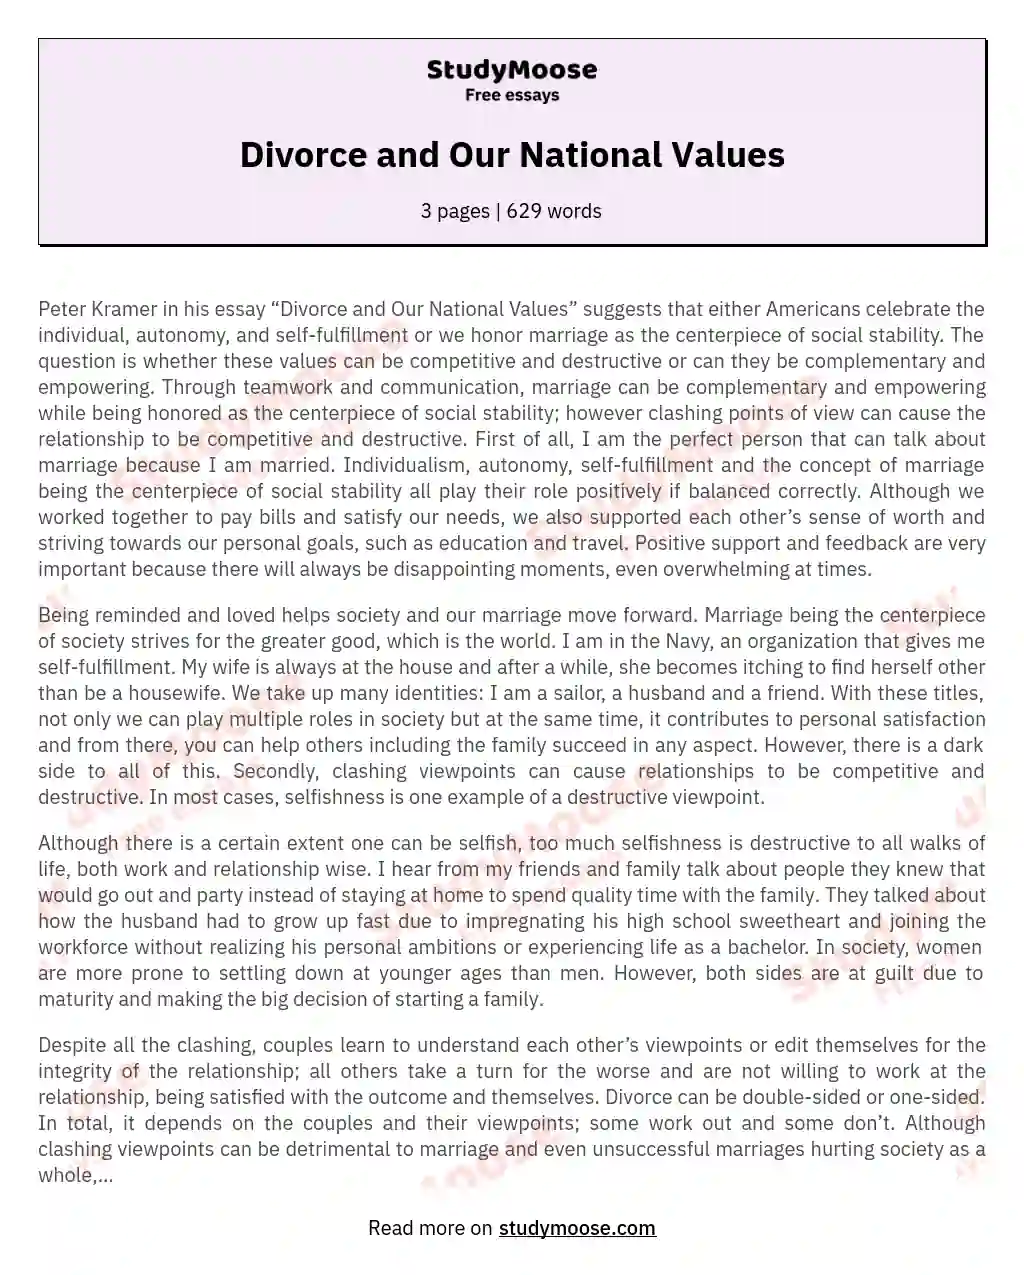 Divorce and Our National Values essay